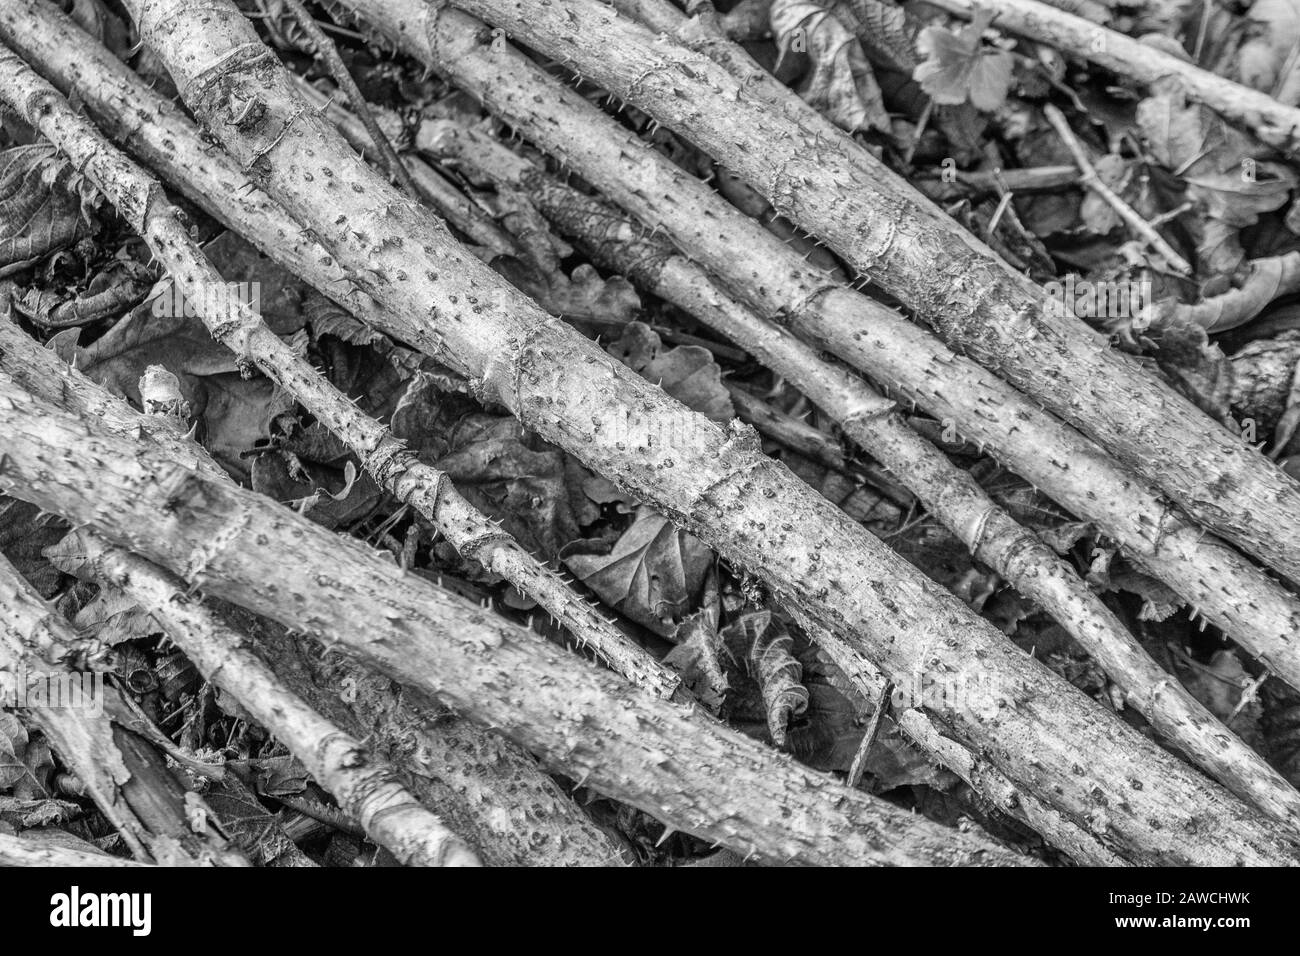 Black & white of cut spiney stems of Aralia /  Devil's Walking Stick. Unclear whether Aralia spinosa or Aralia elata. Abstract spines in nature, sharp Stock Photo